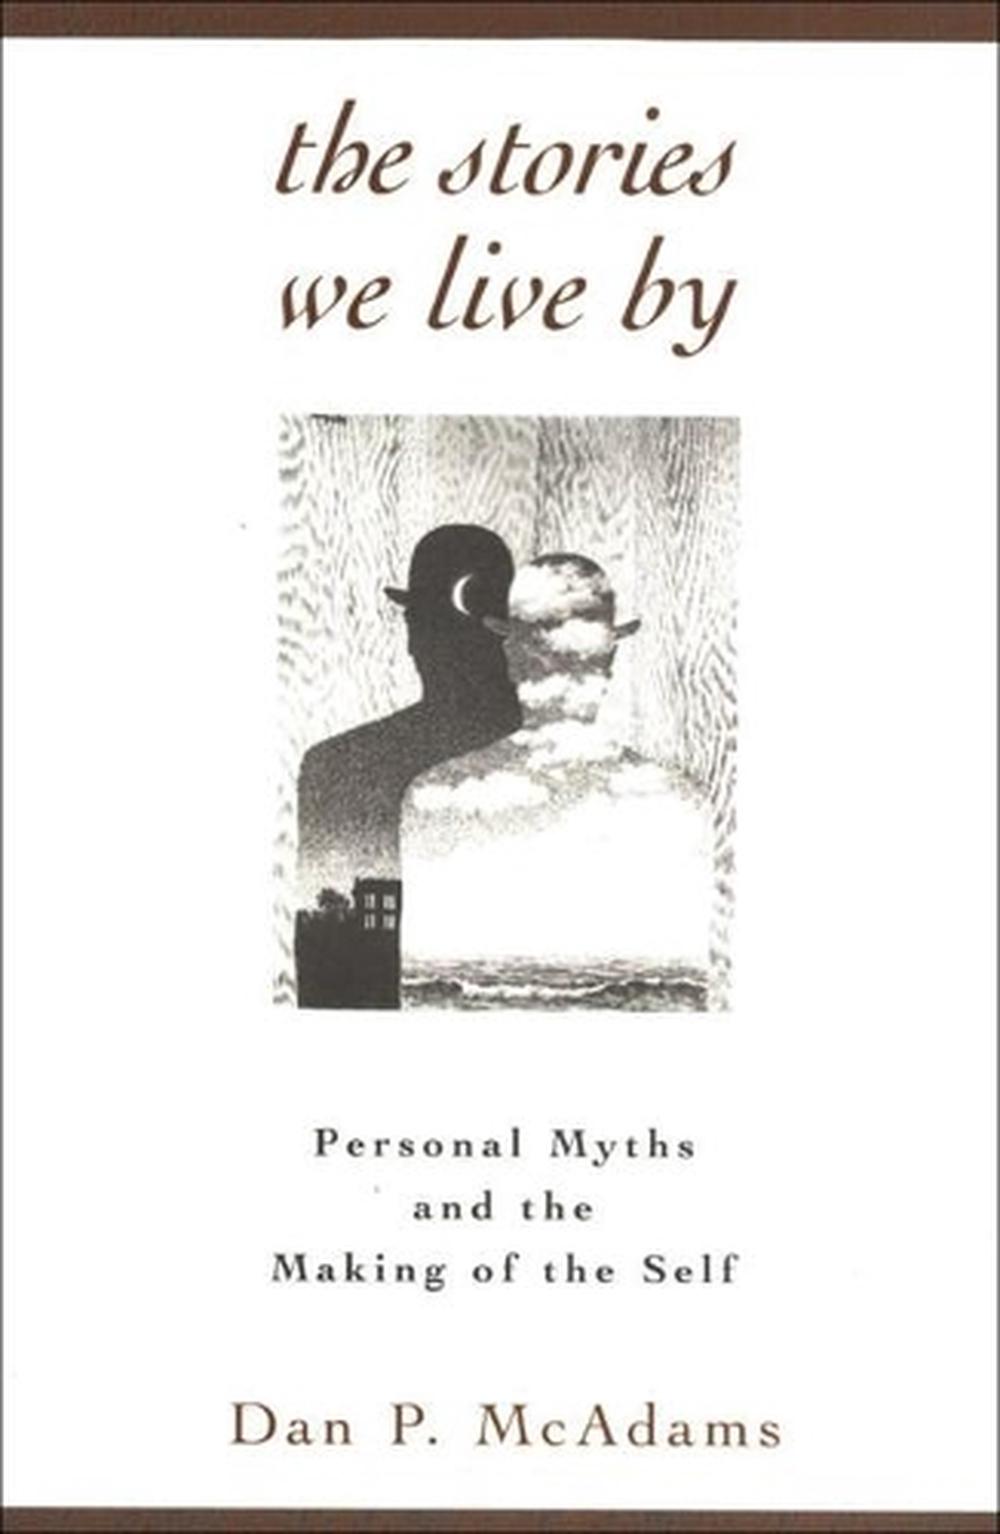 The Stories We Live by Personal Myths and the Making of the Self by